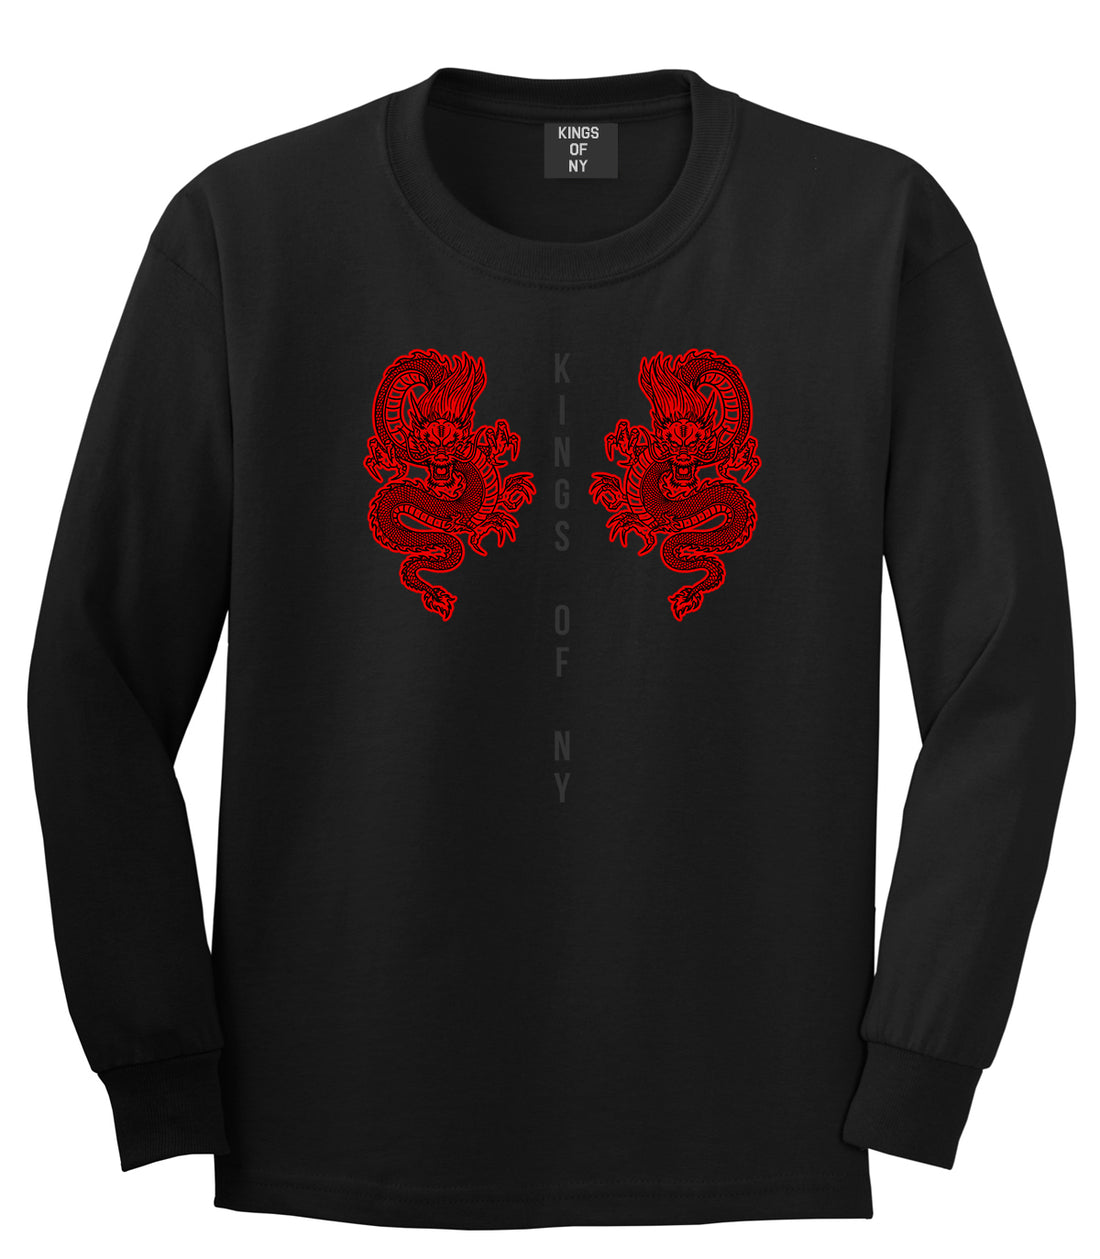 2 Chinese Dragon Long Sleeve T-Shirt in Black